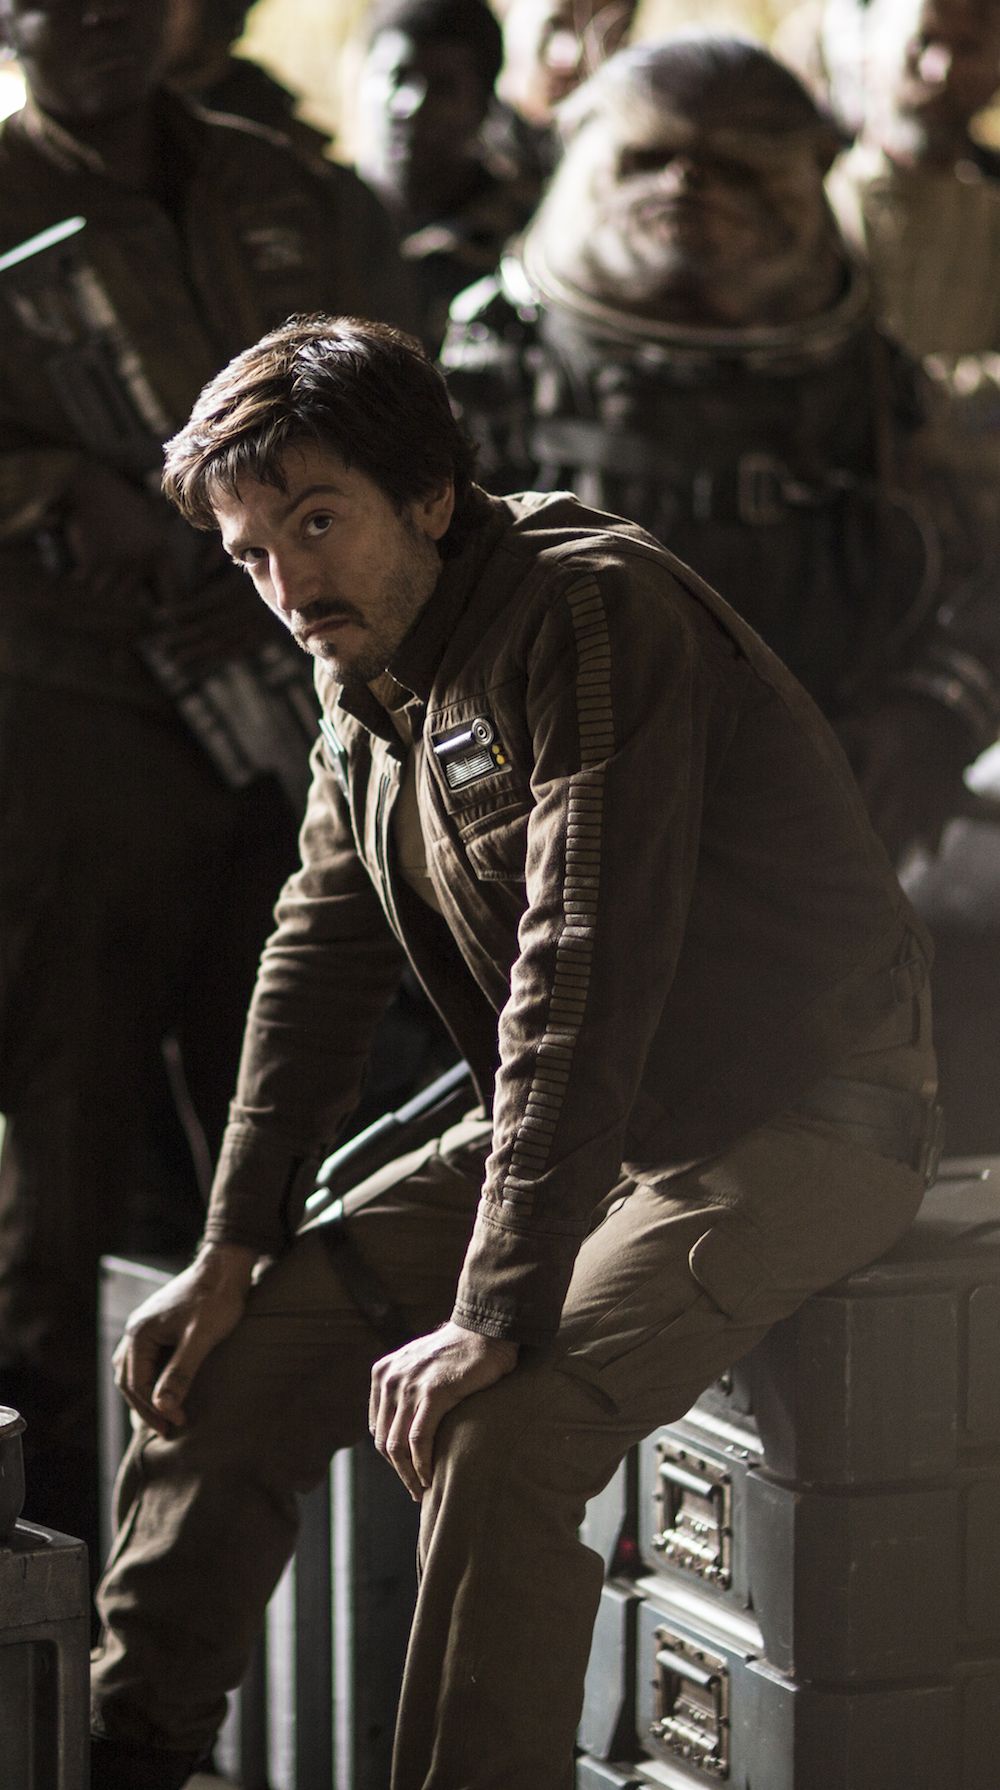 Diego Luna on the Power of Diversity in 'Rogue One: A Star Wars Story' -  Diego Luna 'Rogue One' Interview